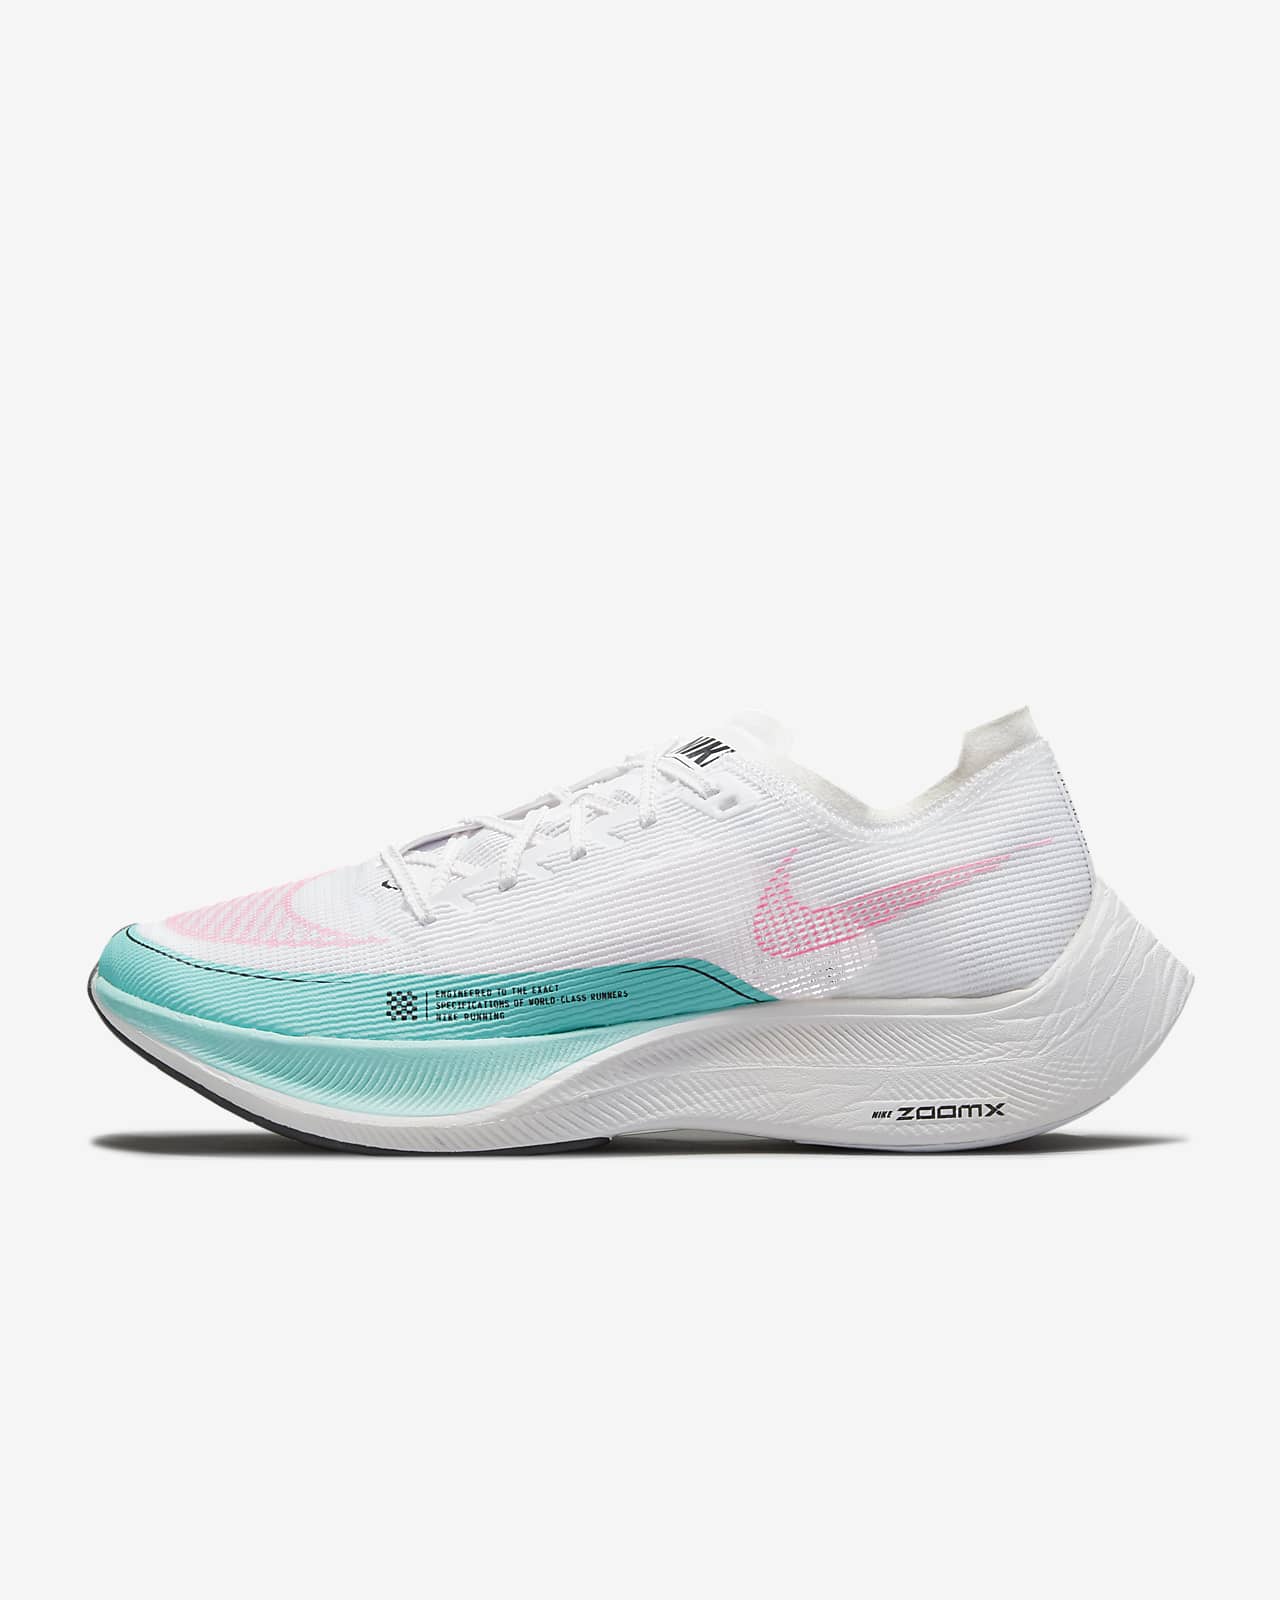 Nike ZoomX Vaporfly Next% 2 Men's Road Racing Shoes